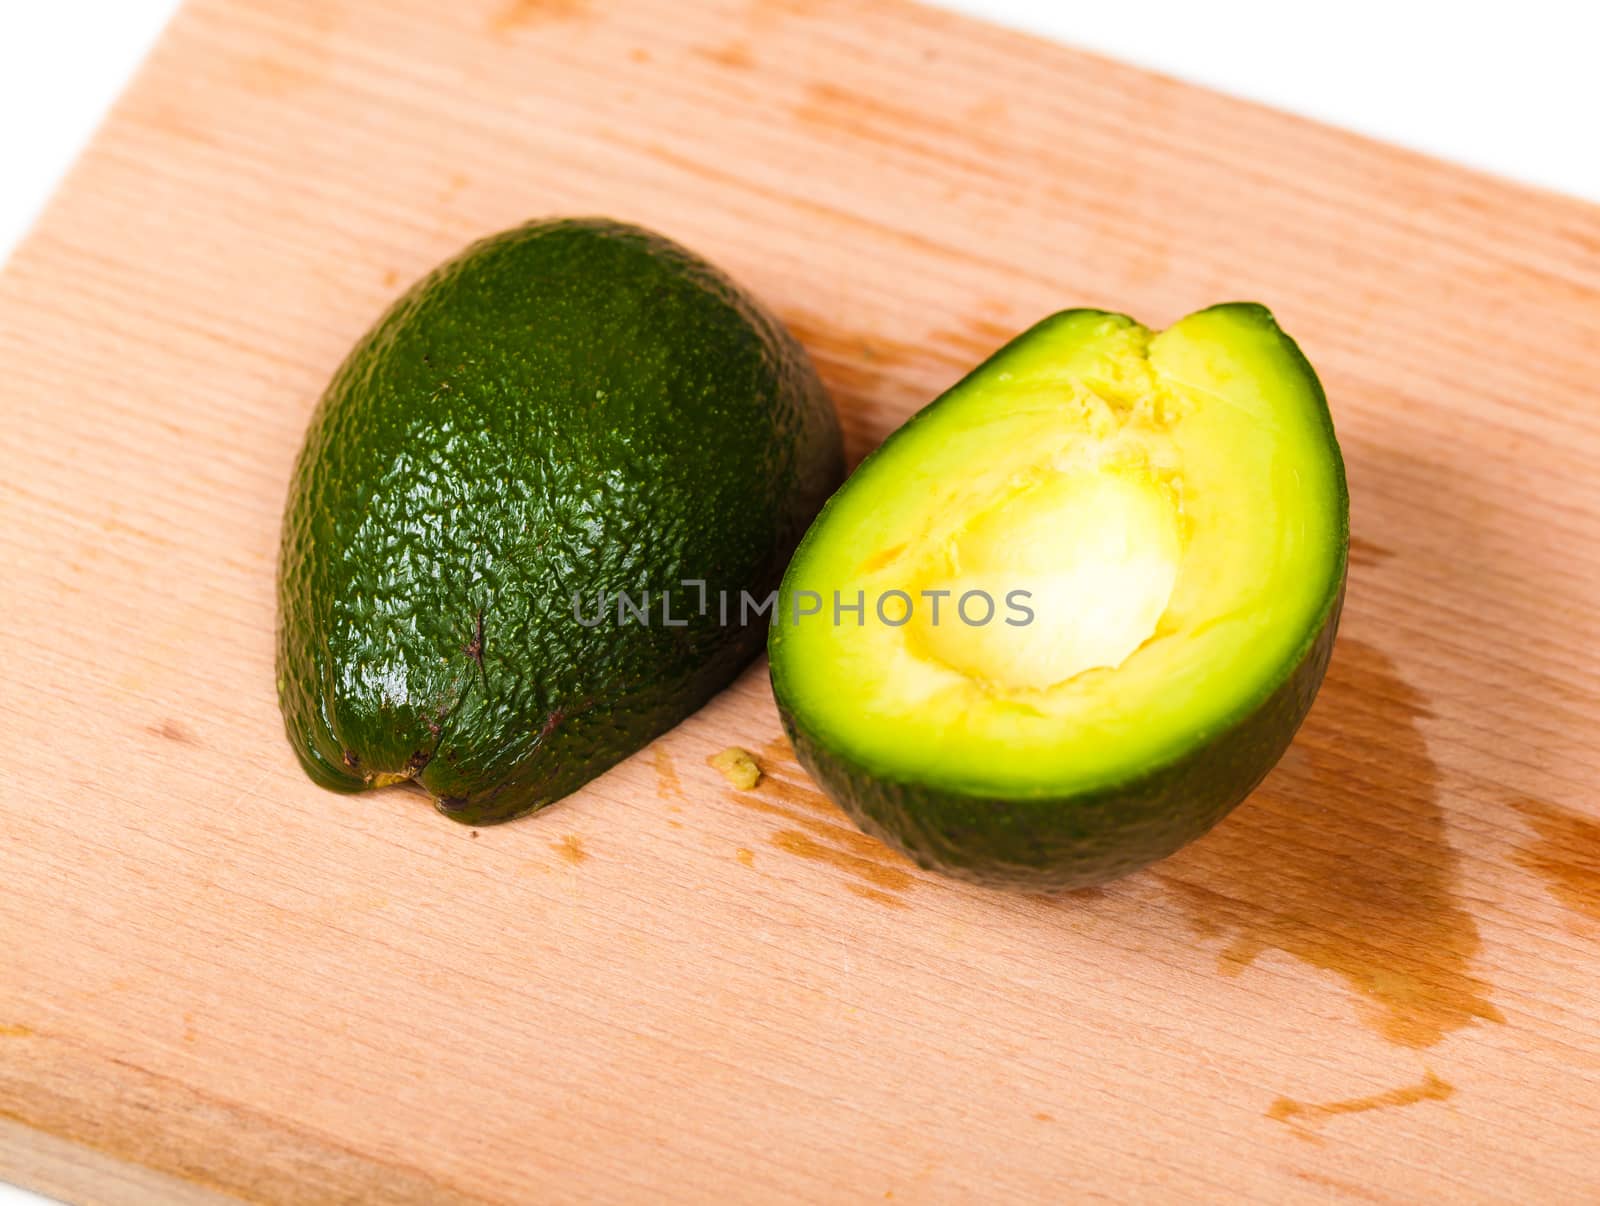 two pieces of fresh avocado close-up on a wooden board